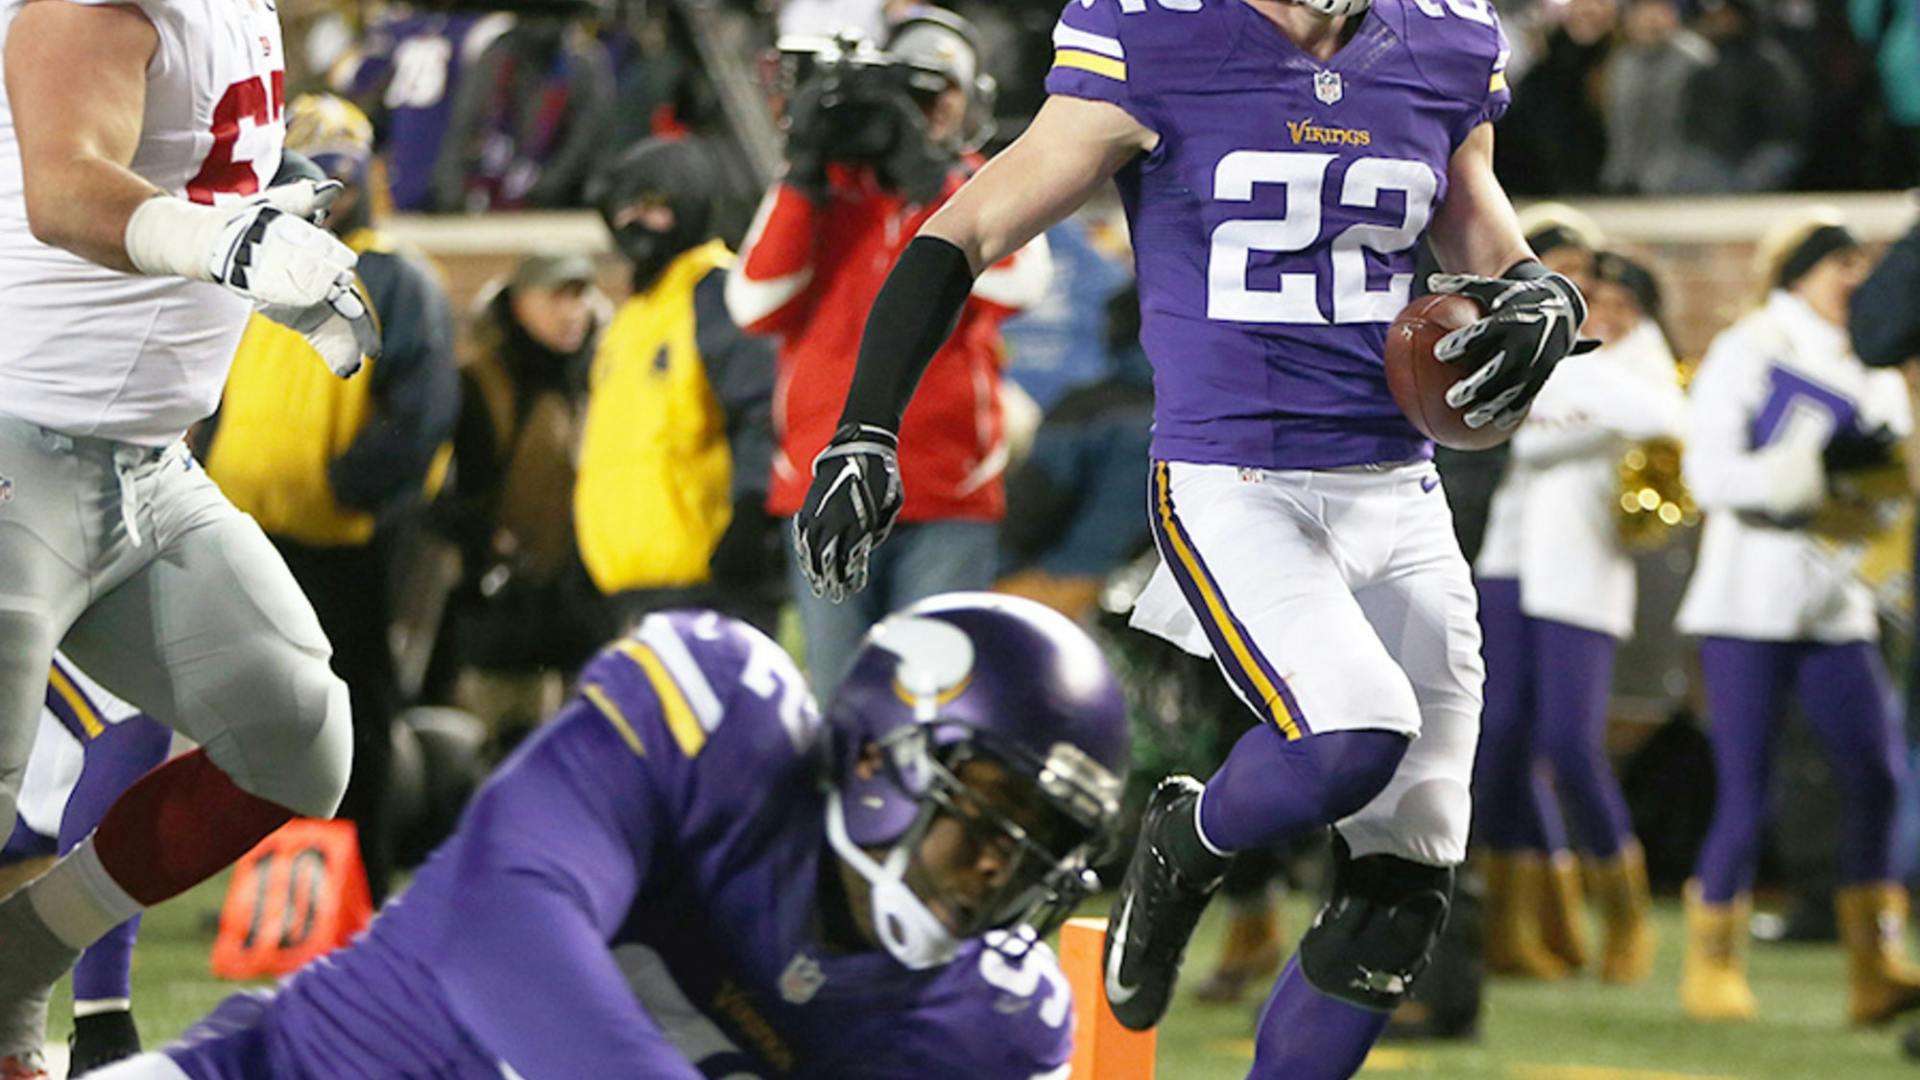 Vikings' safety Harrison Smith is quickly approaching cornerback Captain Munnerlyn's career pick-six record.